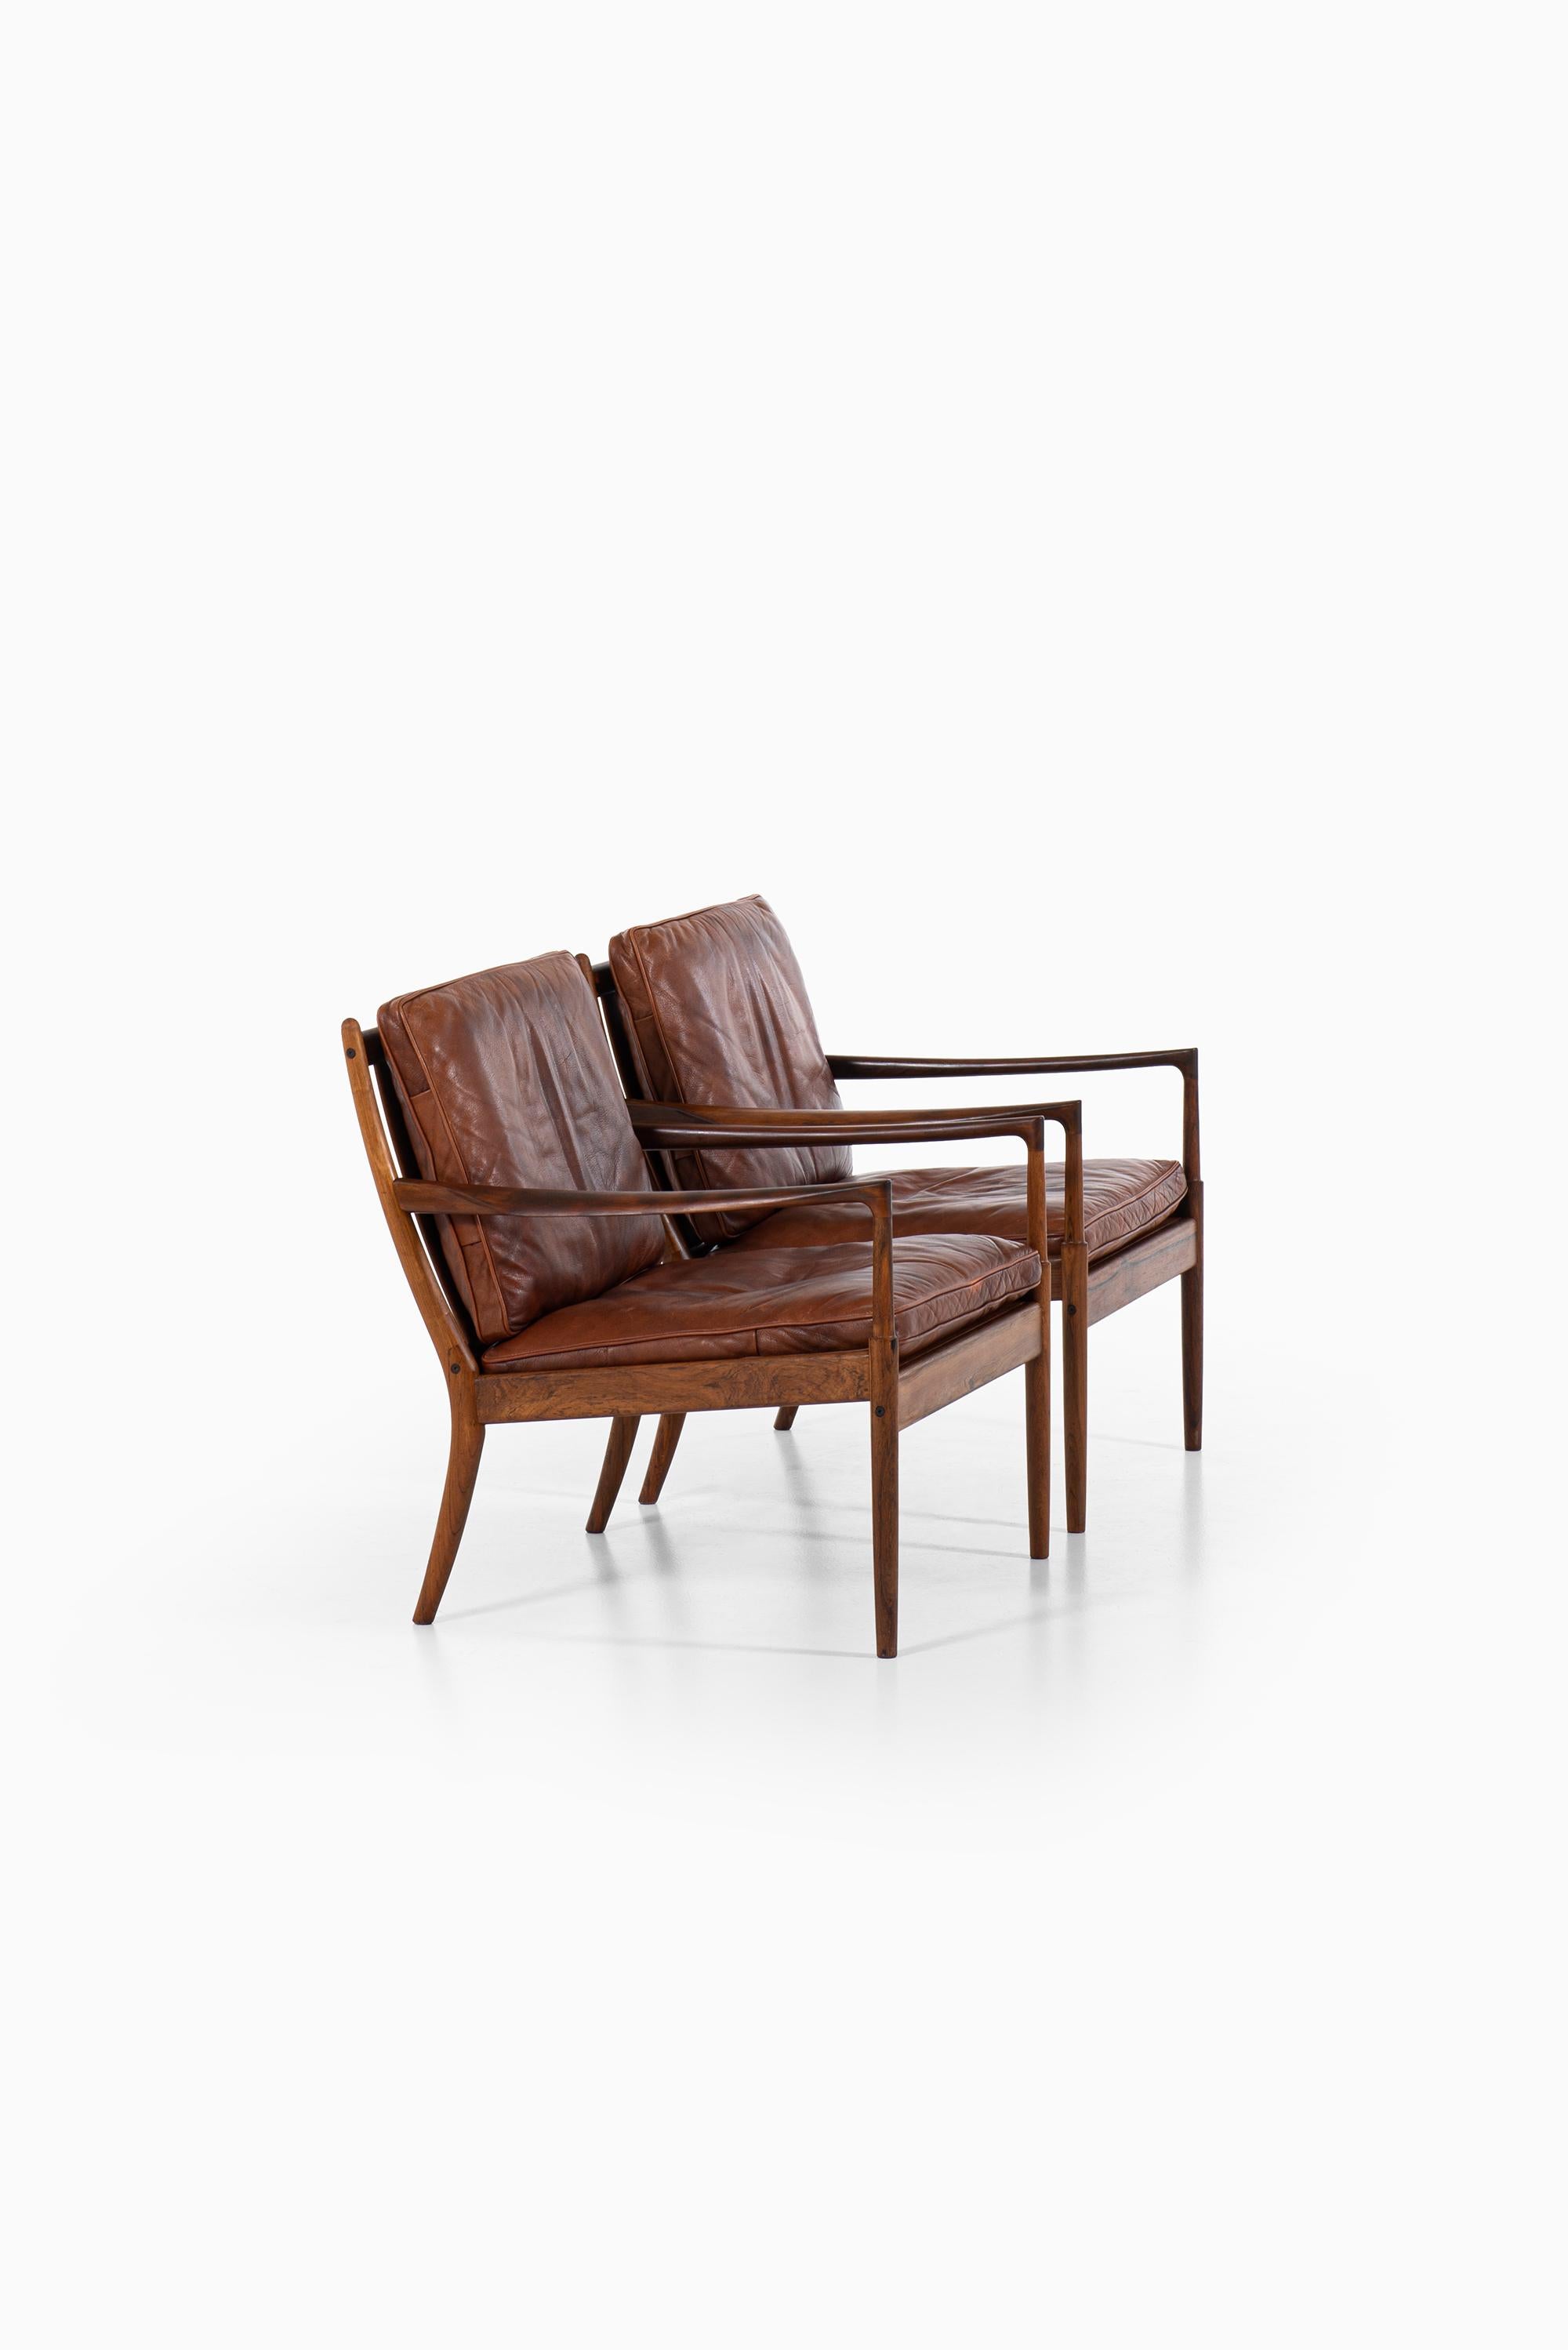 Mid-20th Century Ib Kofod-Larsen easy chairs model Samsö produced by OPE in Sweden